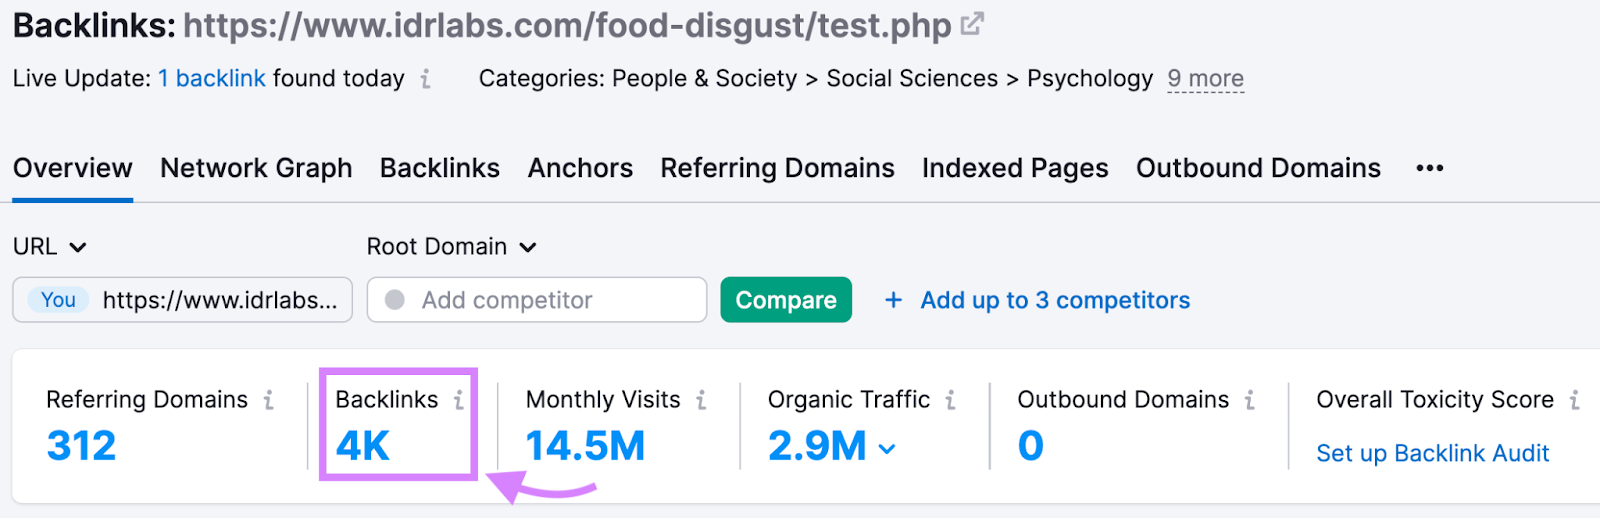 Backlink Analytics results for IDRlabs’ food disgust test